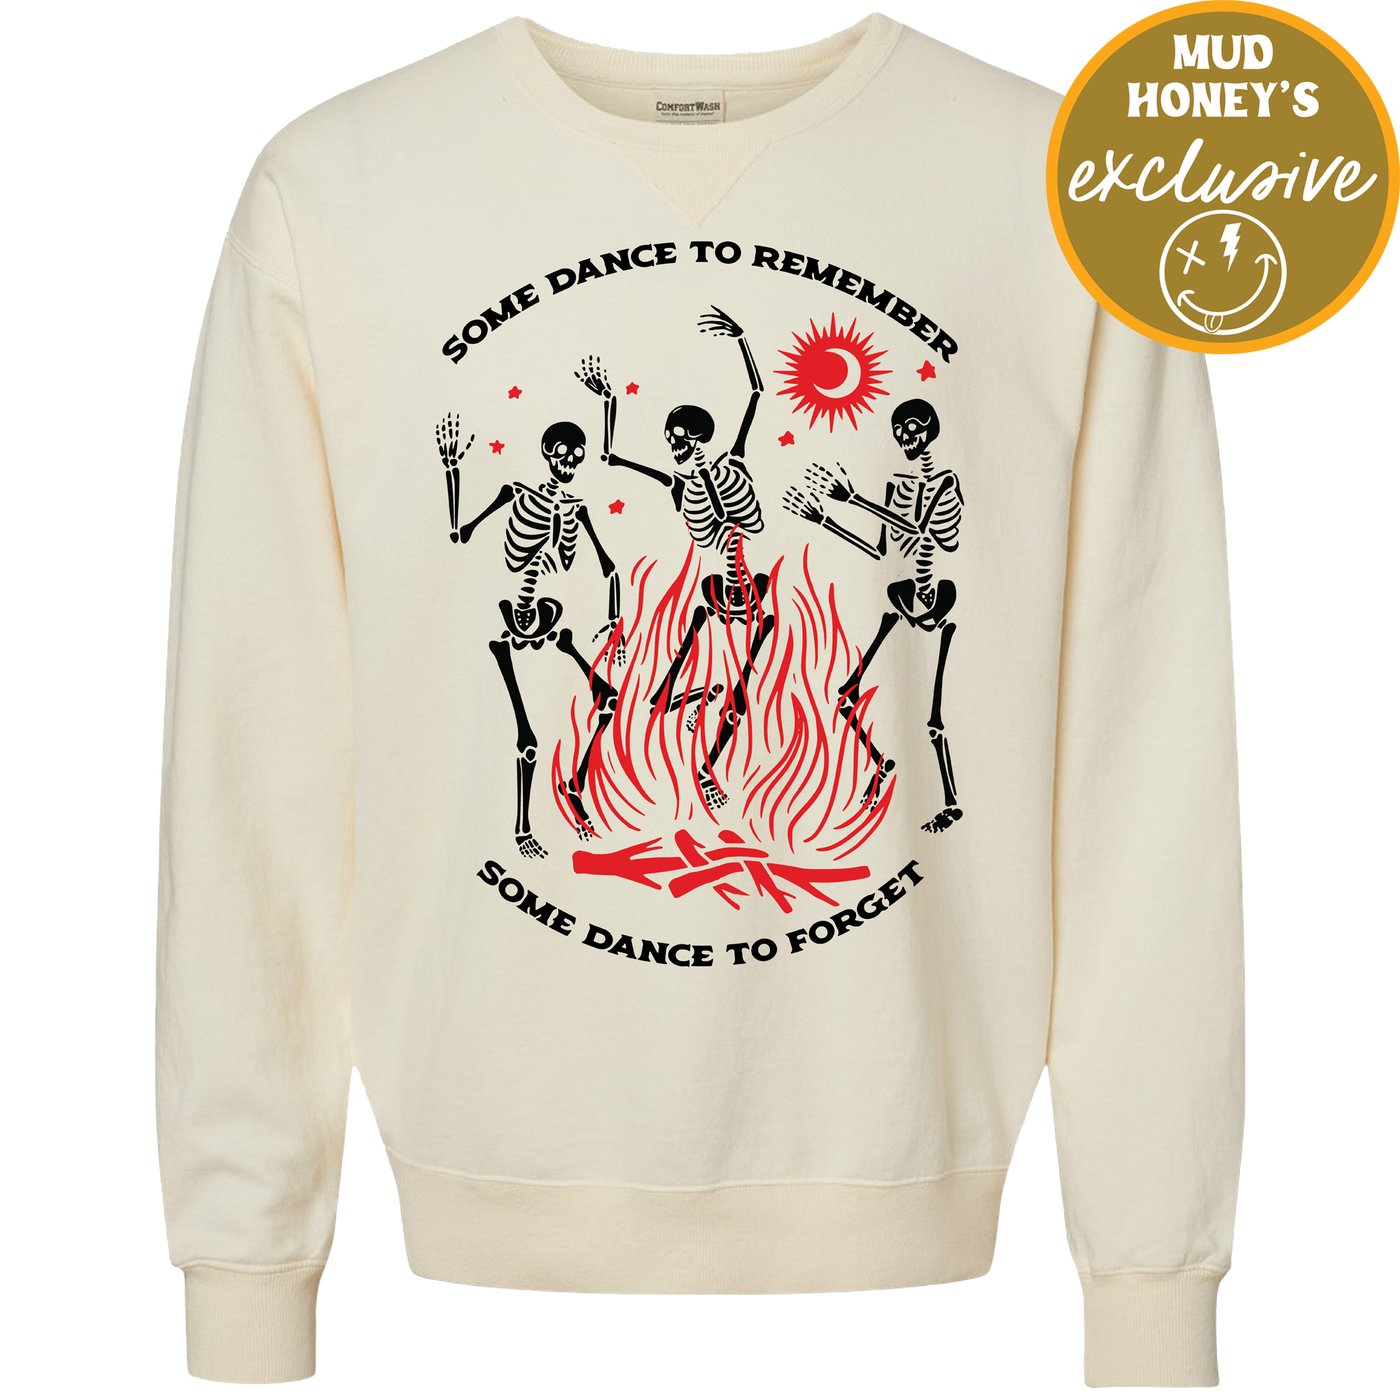 Some Dance to Remember, Some Dance to Forget Tee/Sweatshirt